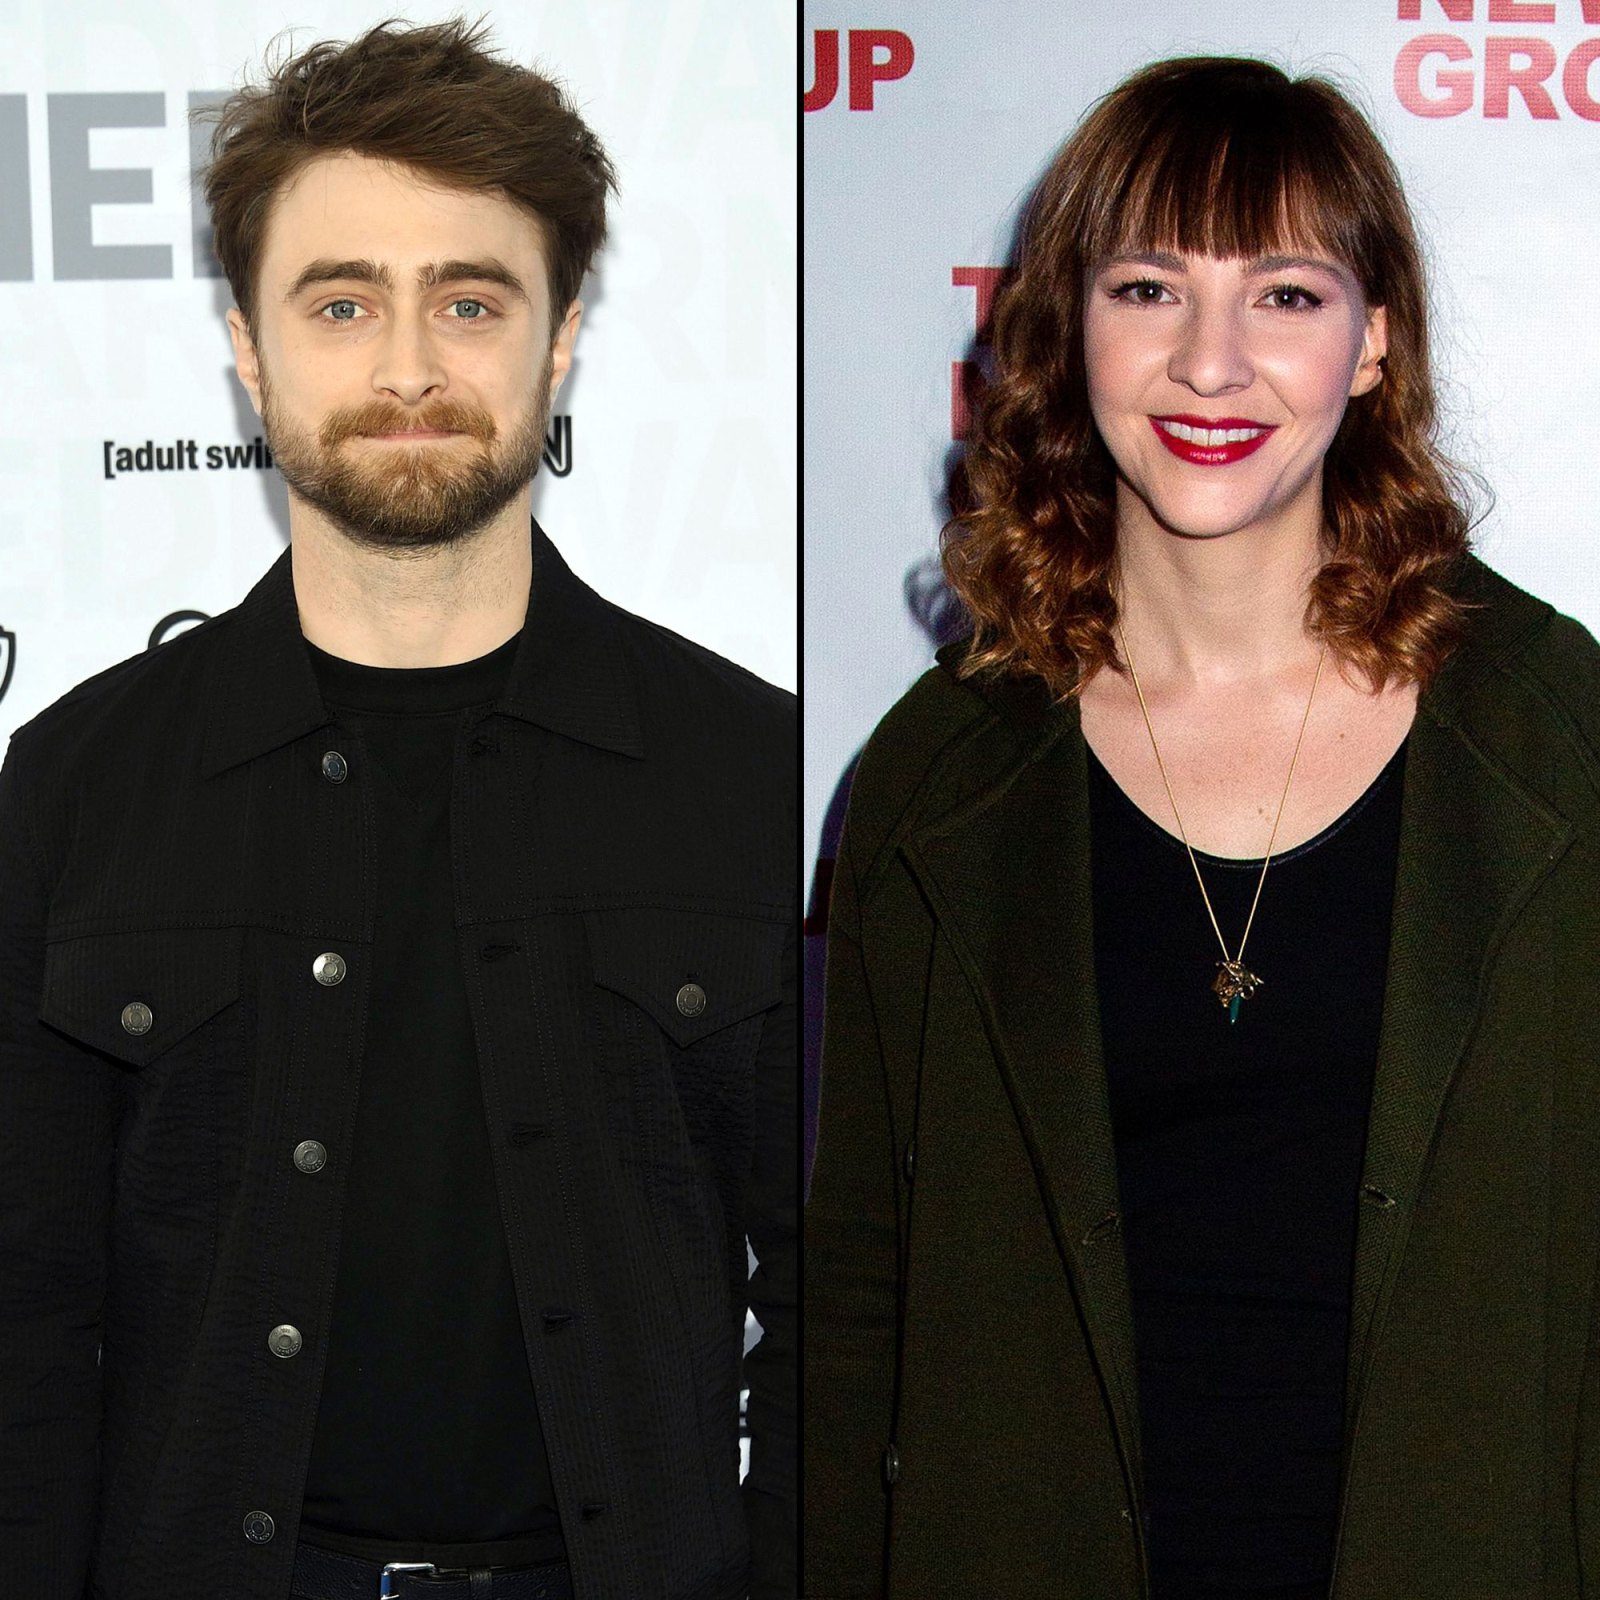 Daniel Radcliffe and Erin Darkes Relationship Timeline From Costars to Longtime Love